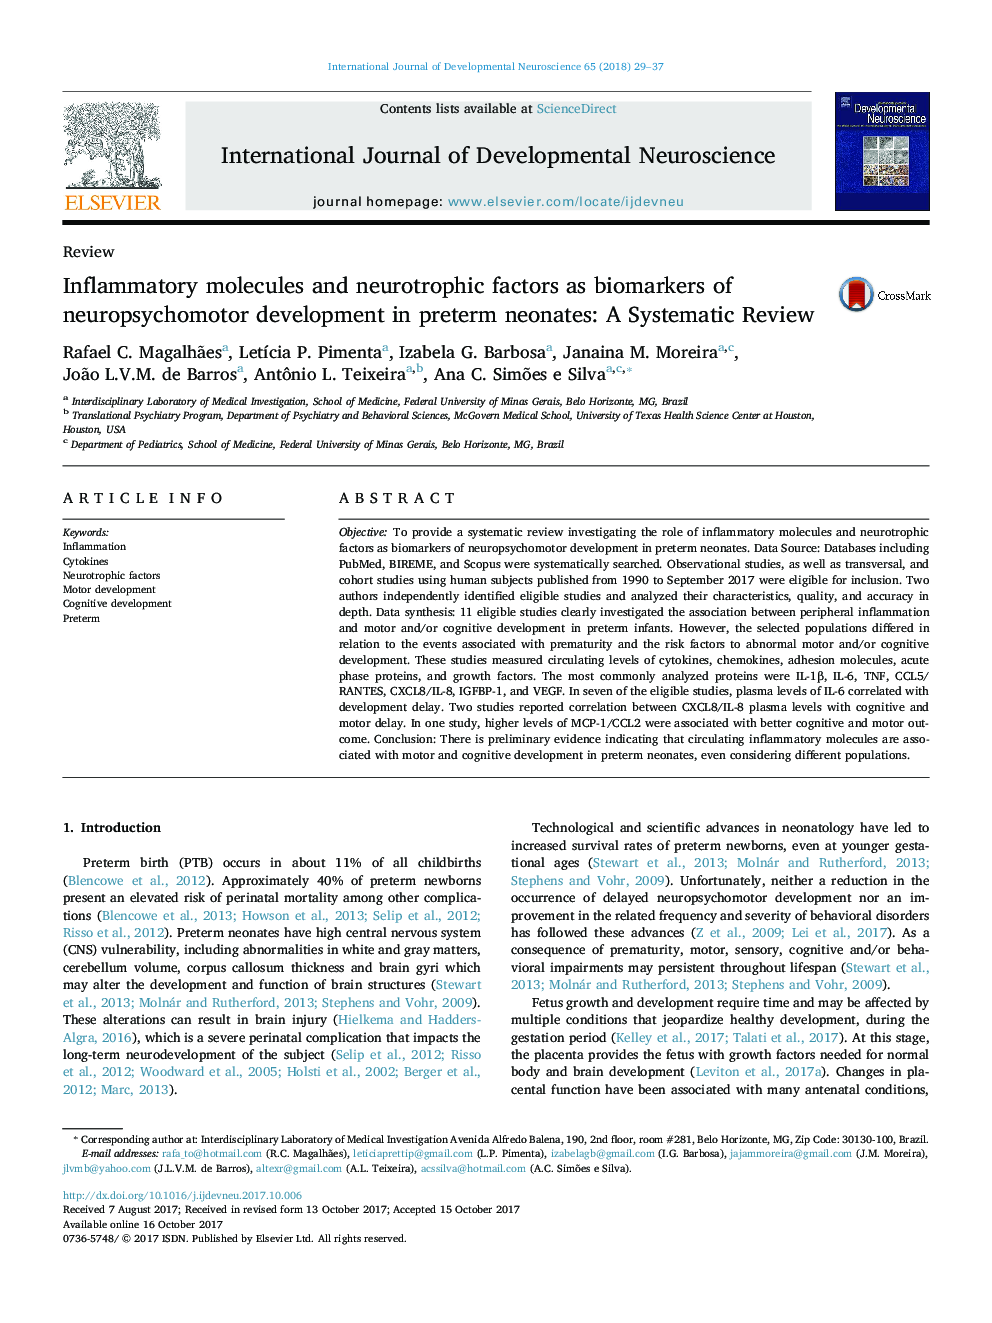 Inflammatory molecules and neurotrophic factors as biomarkers of neuropsychomotor development in preterm neonates: A Systematic Review